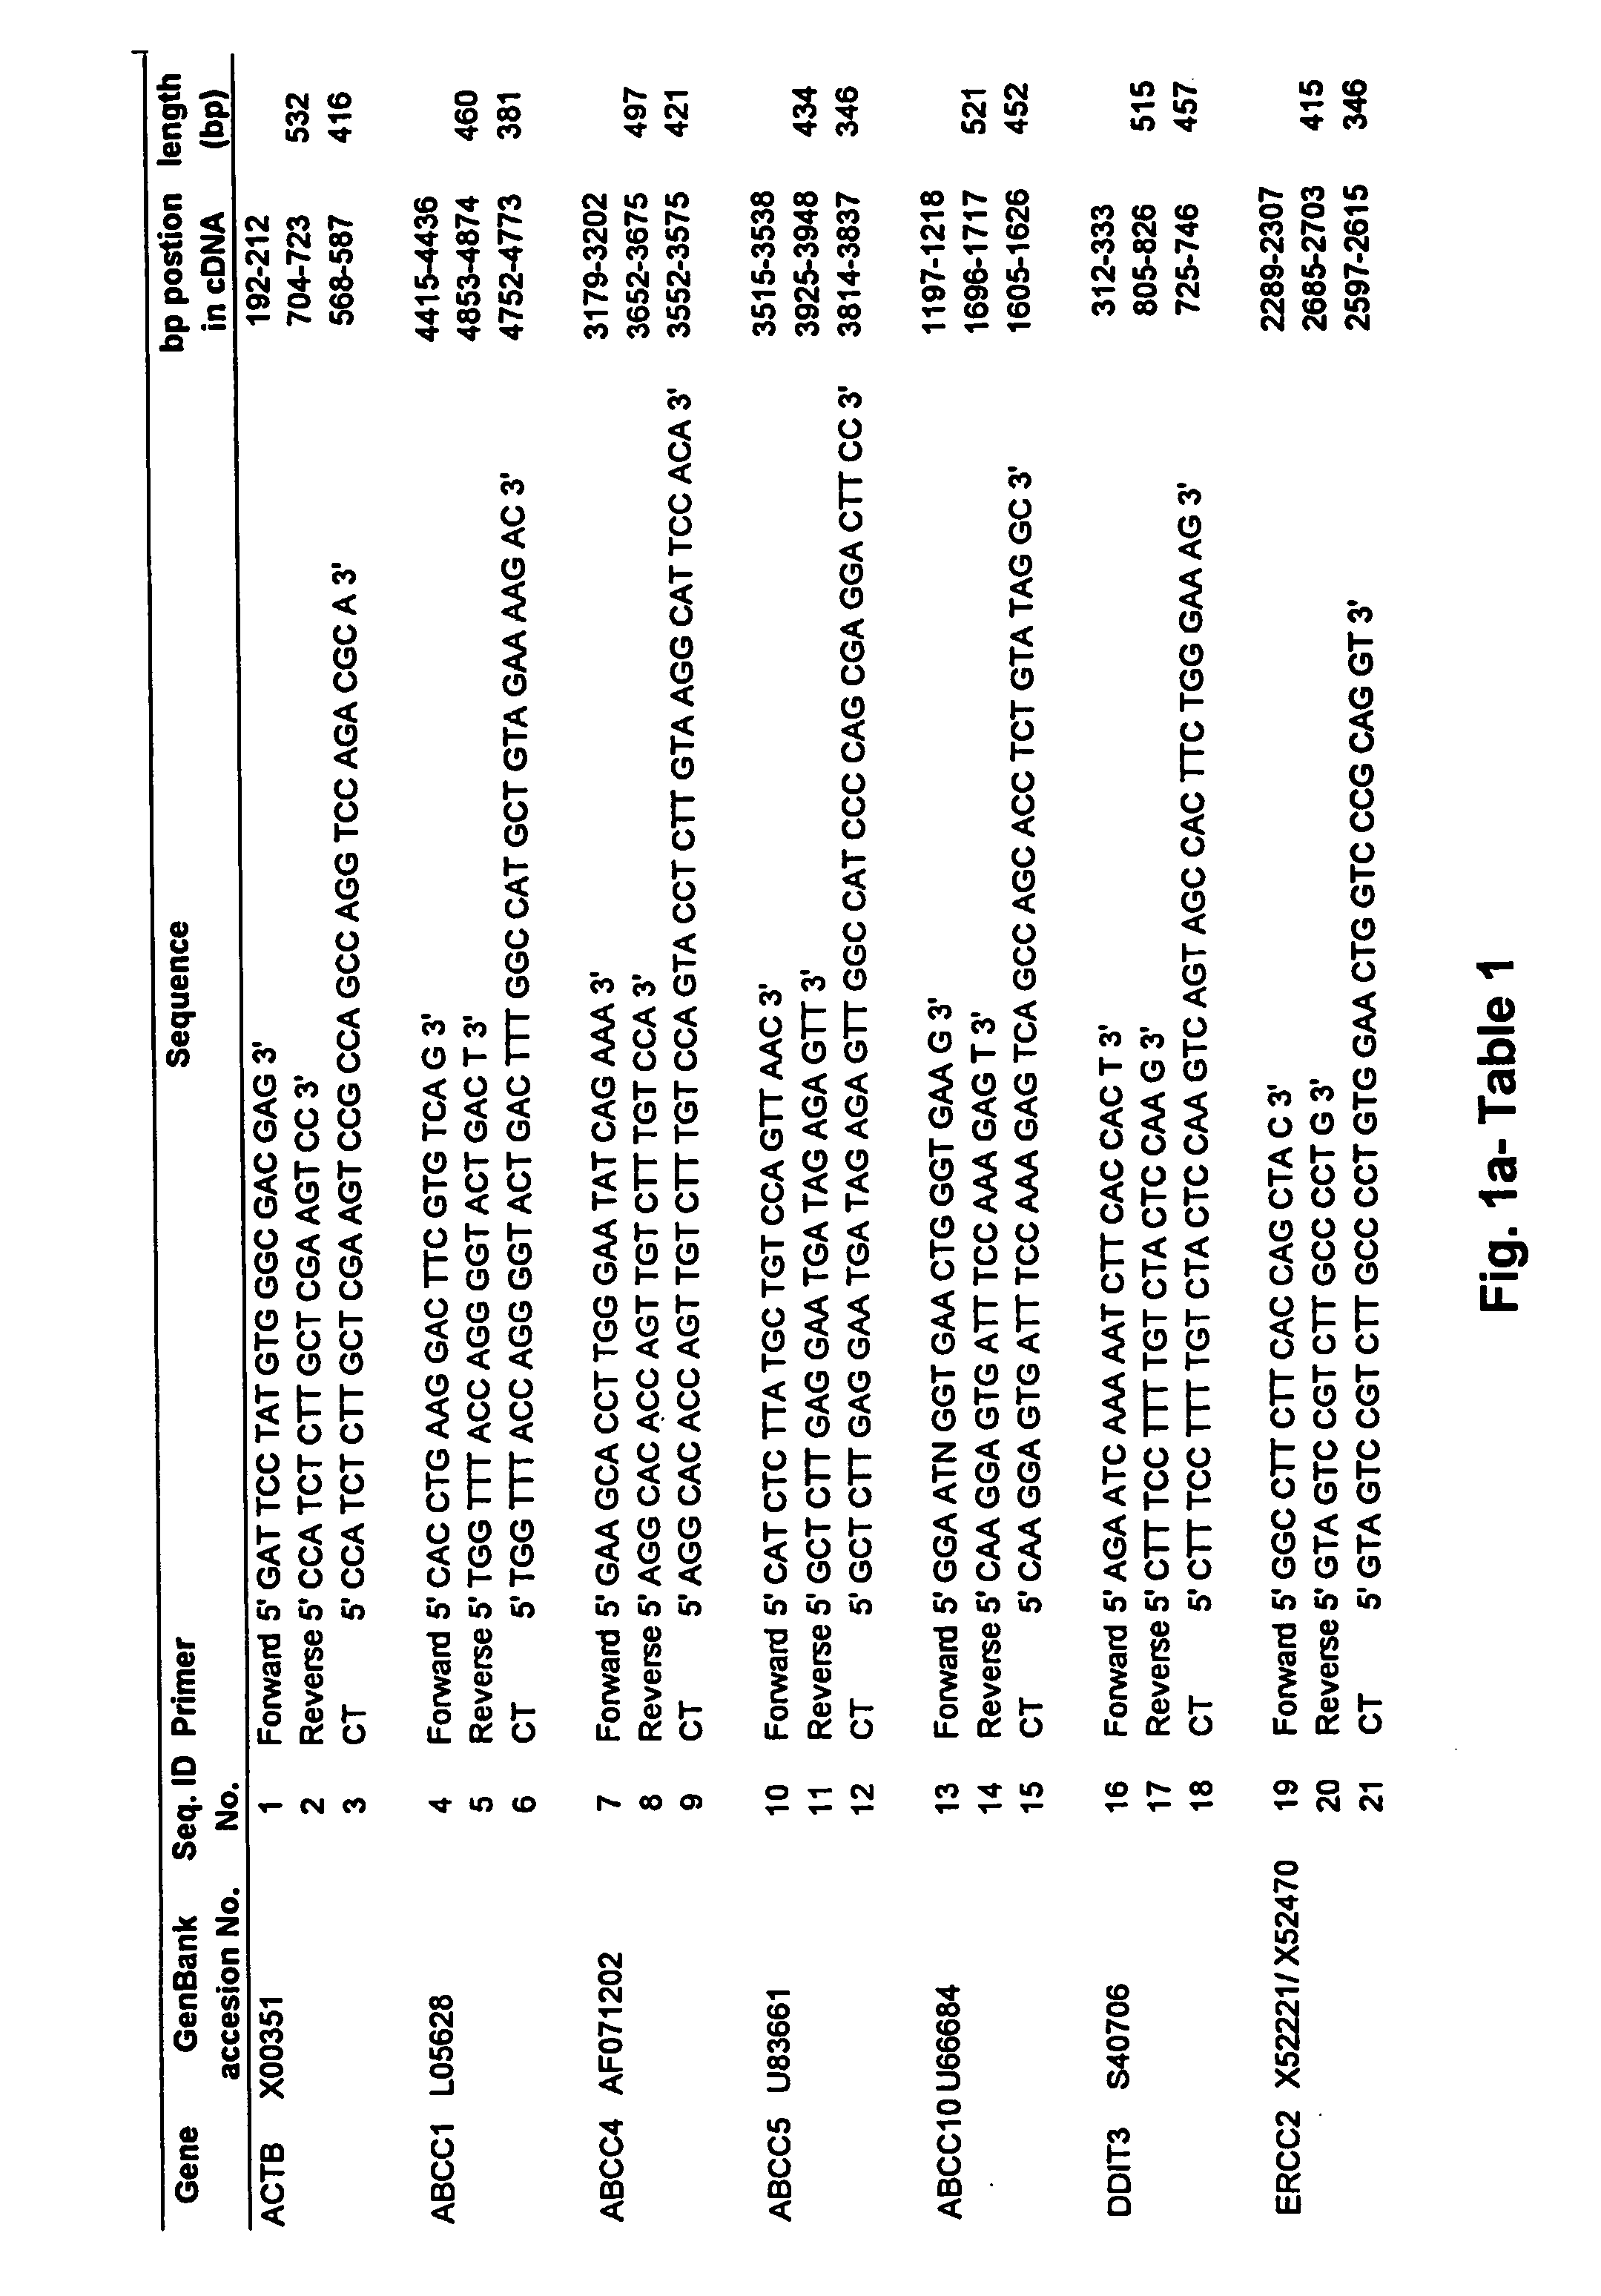 Method and compositions for the diagnosis and treatment of non-small cell lung cancer using gene expression profiles